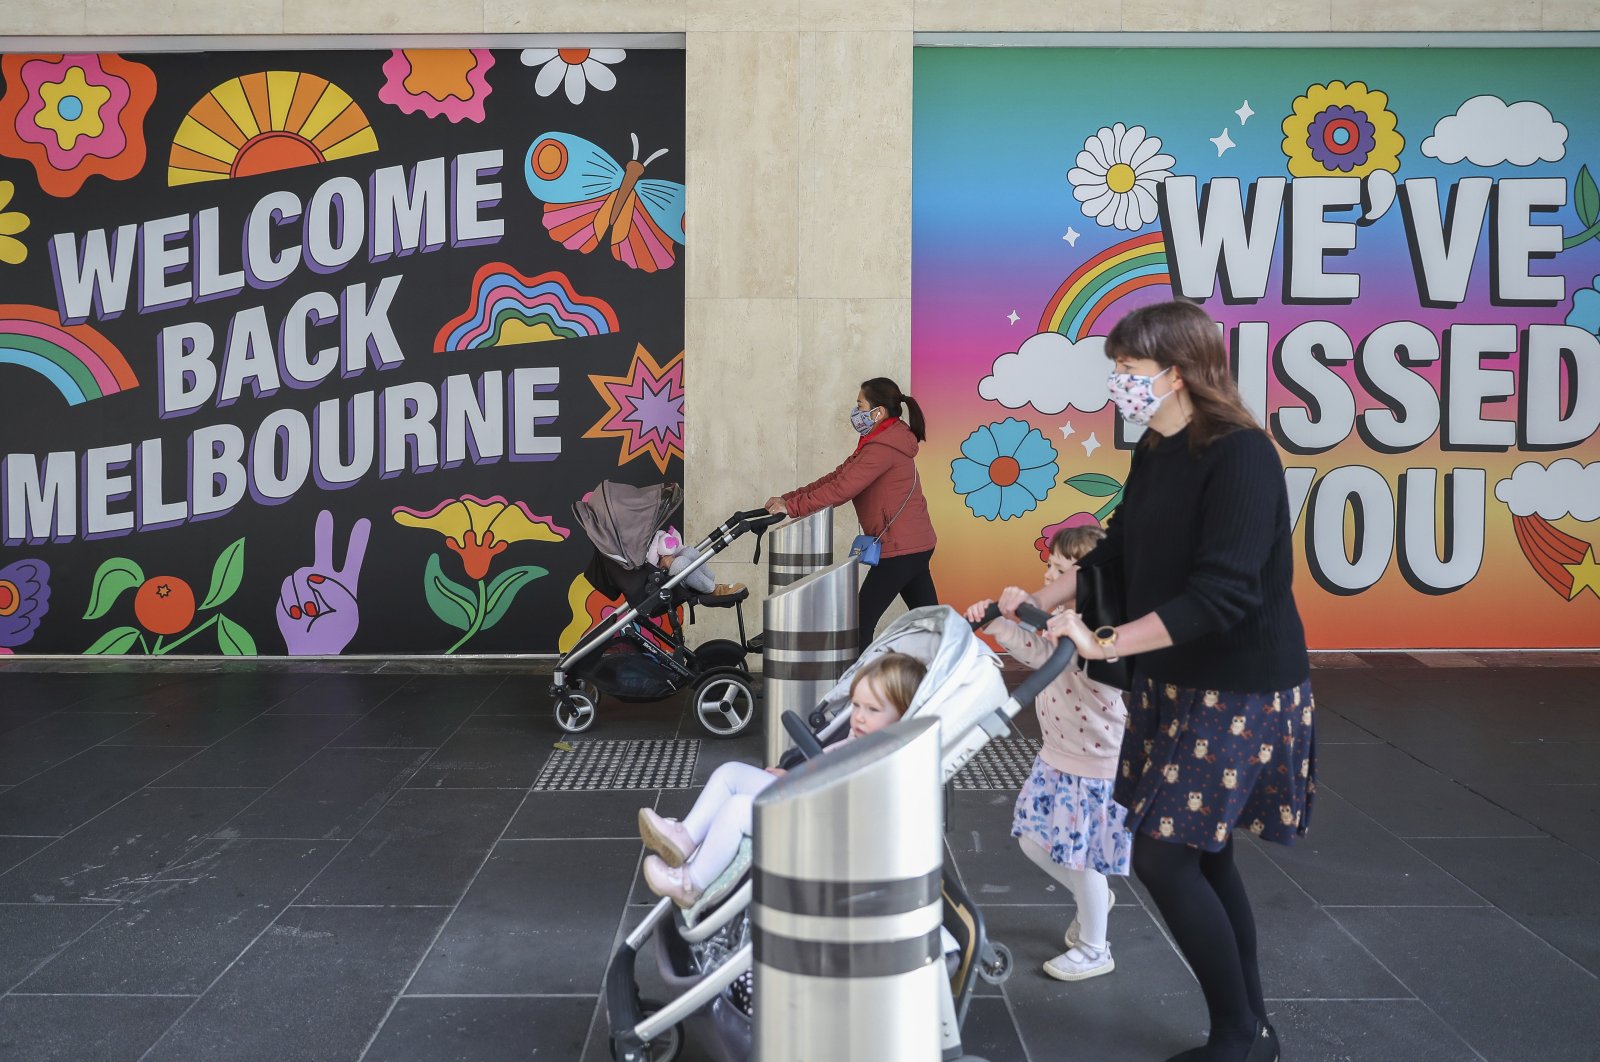 Women wearing masks push strollers past signage in Melbourne, Australia, Oct. 28, 2020. (AP Photo)